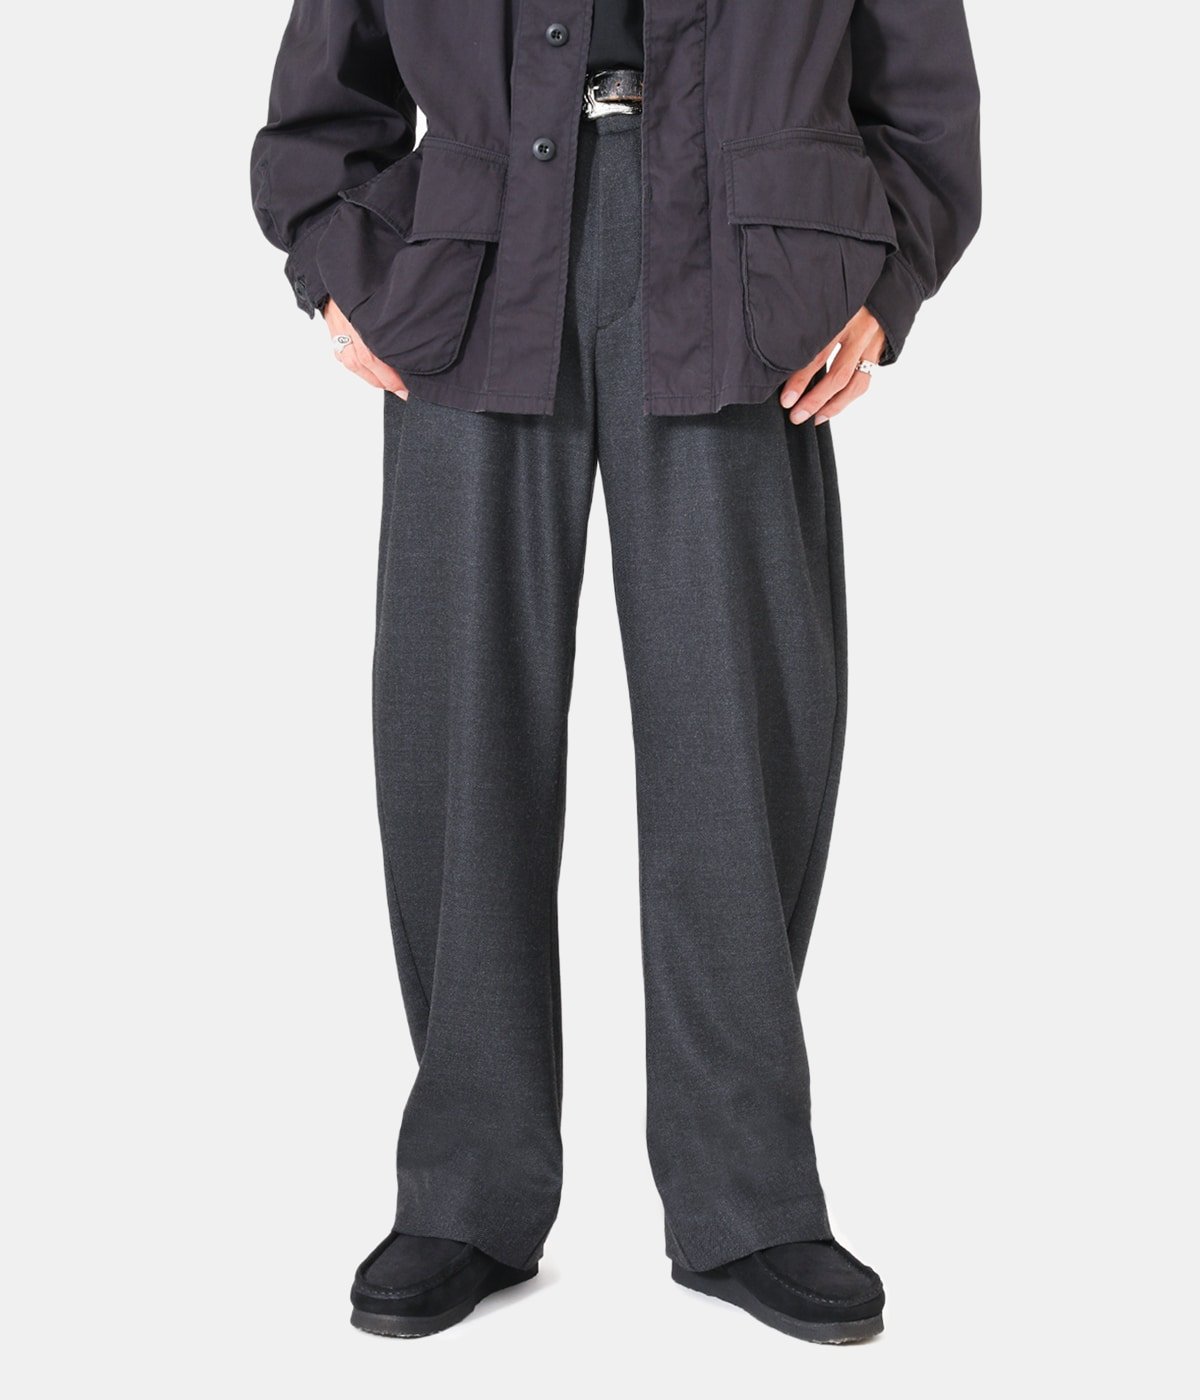 Weaners wool Trousers